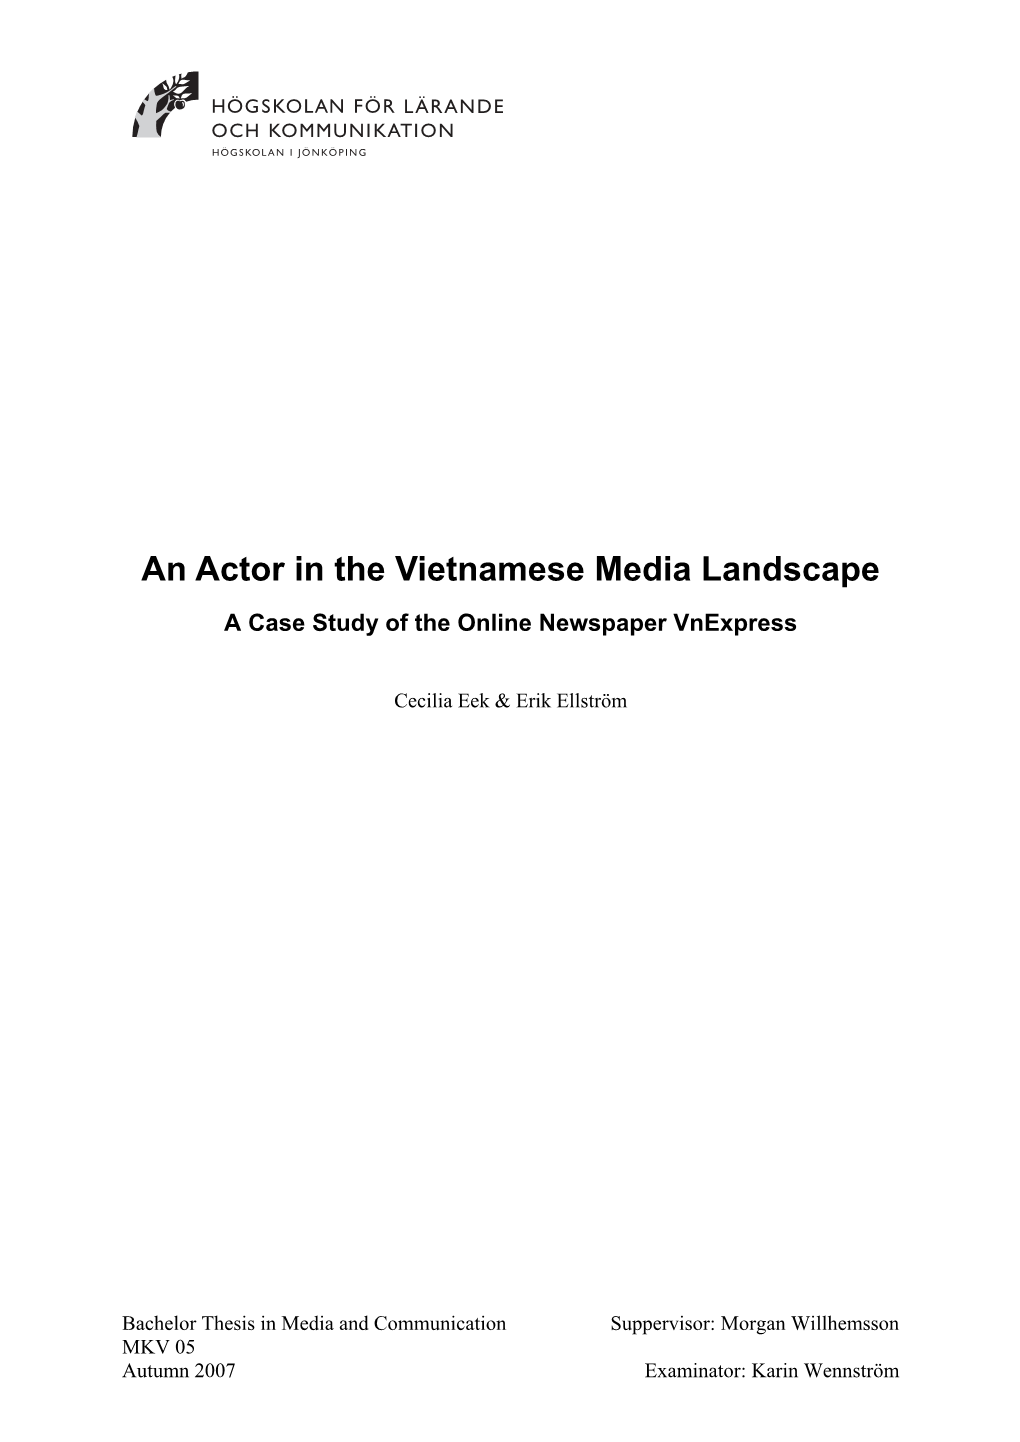 An Actor in the Vietnamese Media Landscape